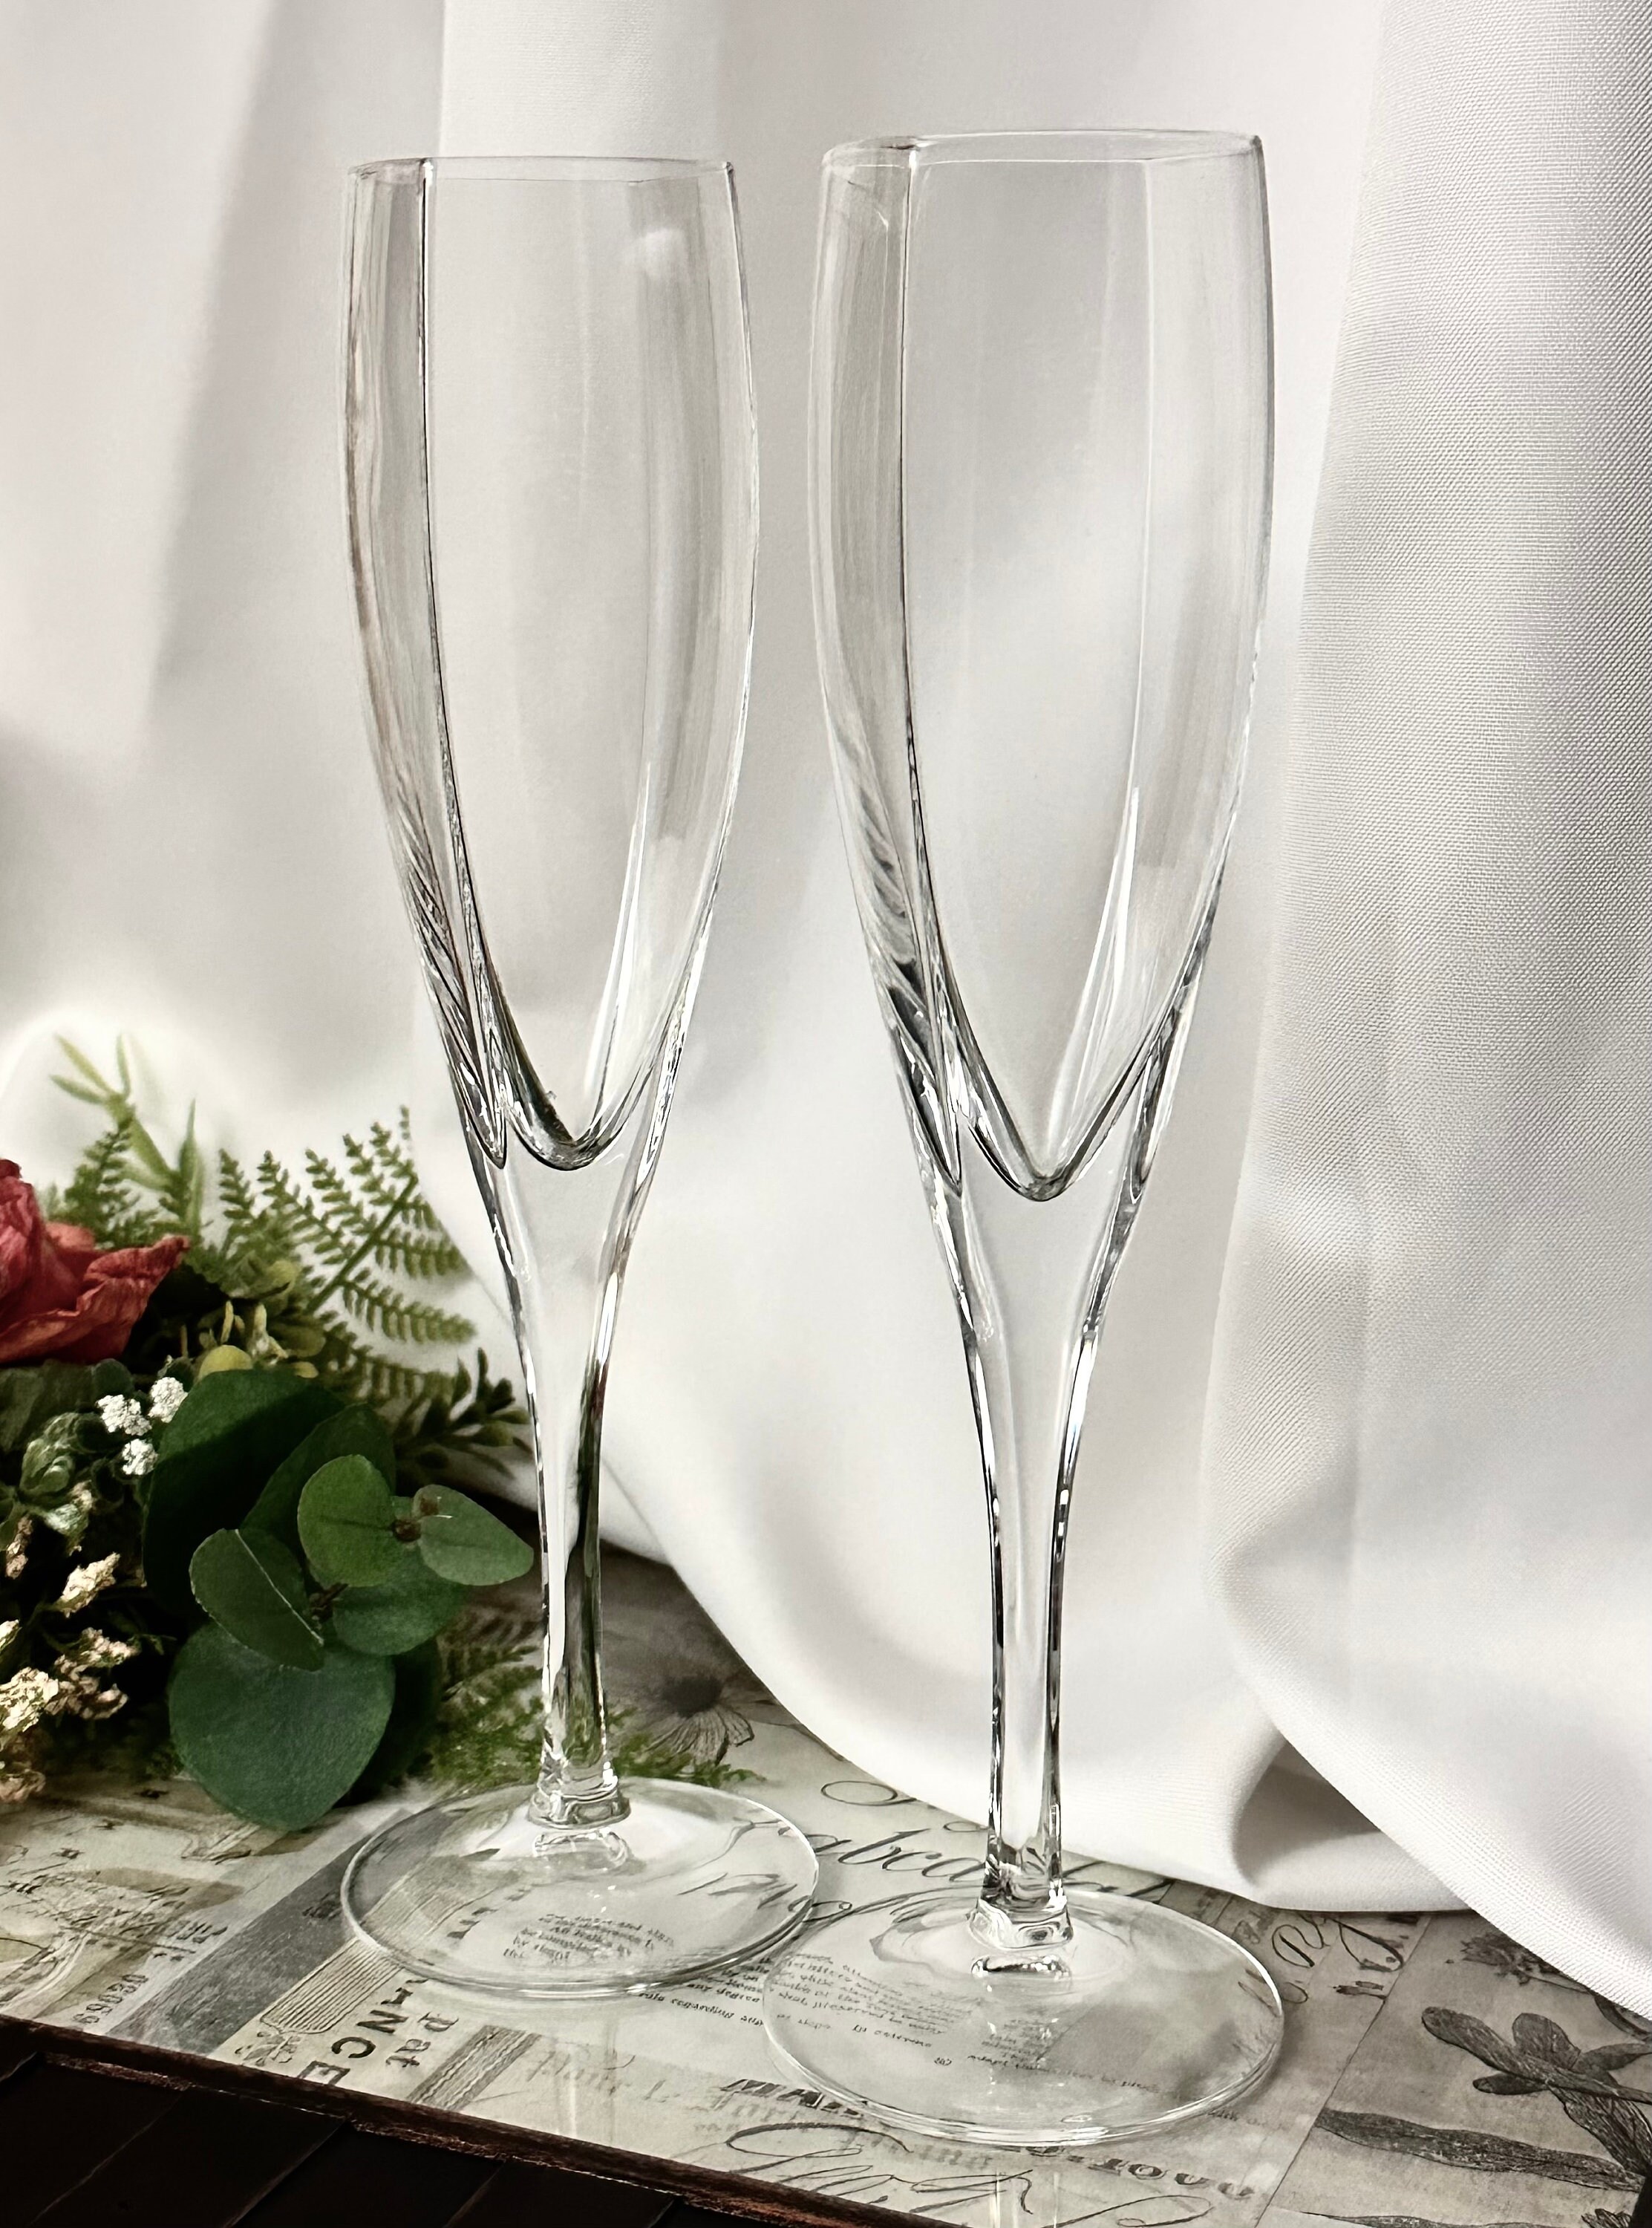 Set of 2 Mikasa Panache Clear Crystal Square Bowl Champagne Flutes